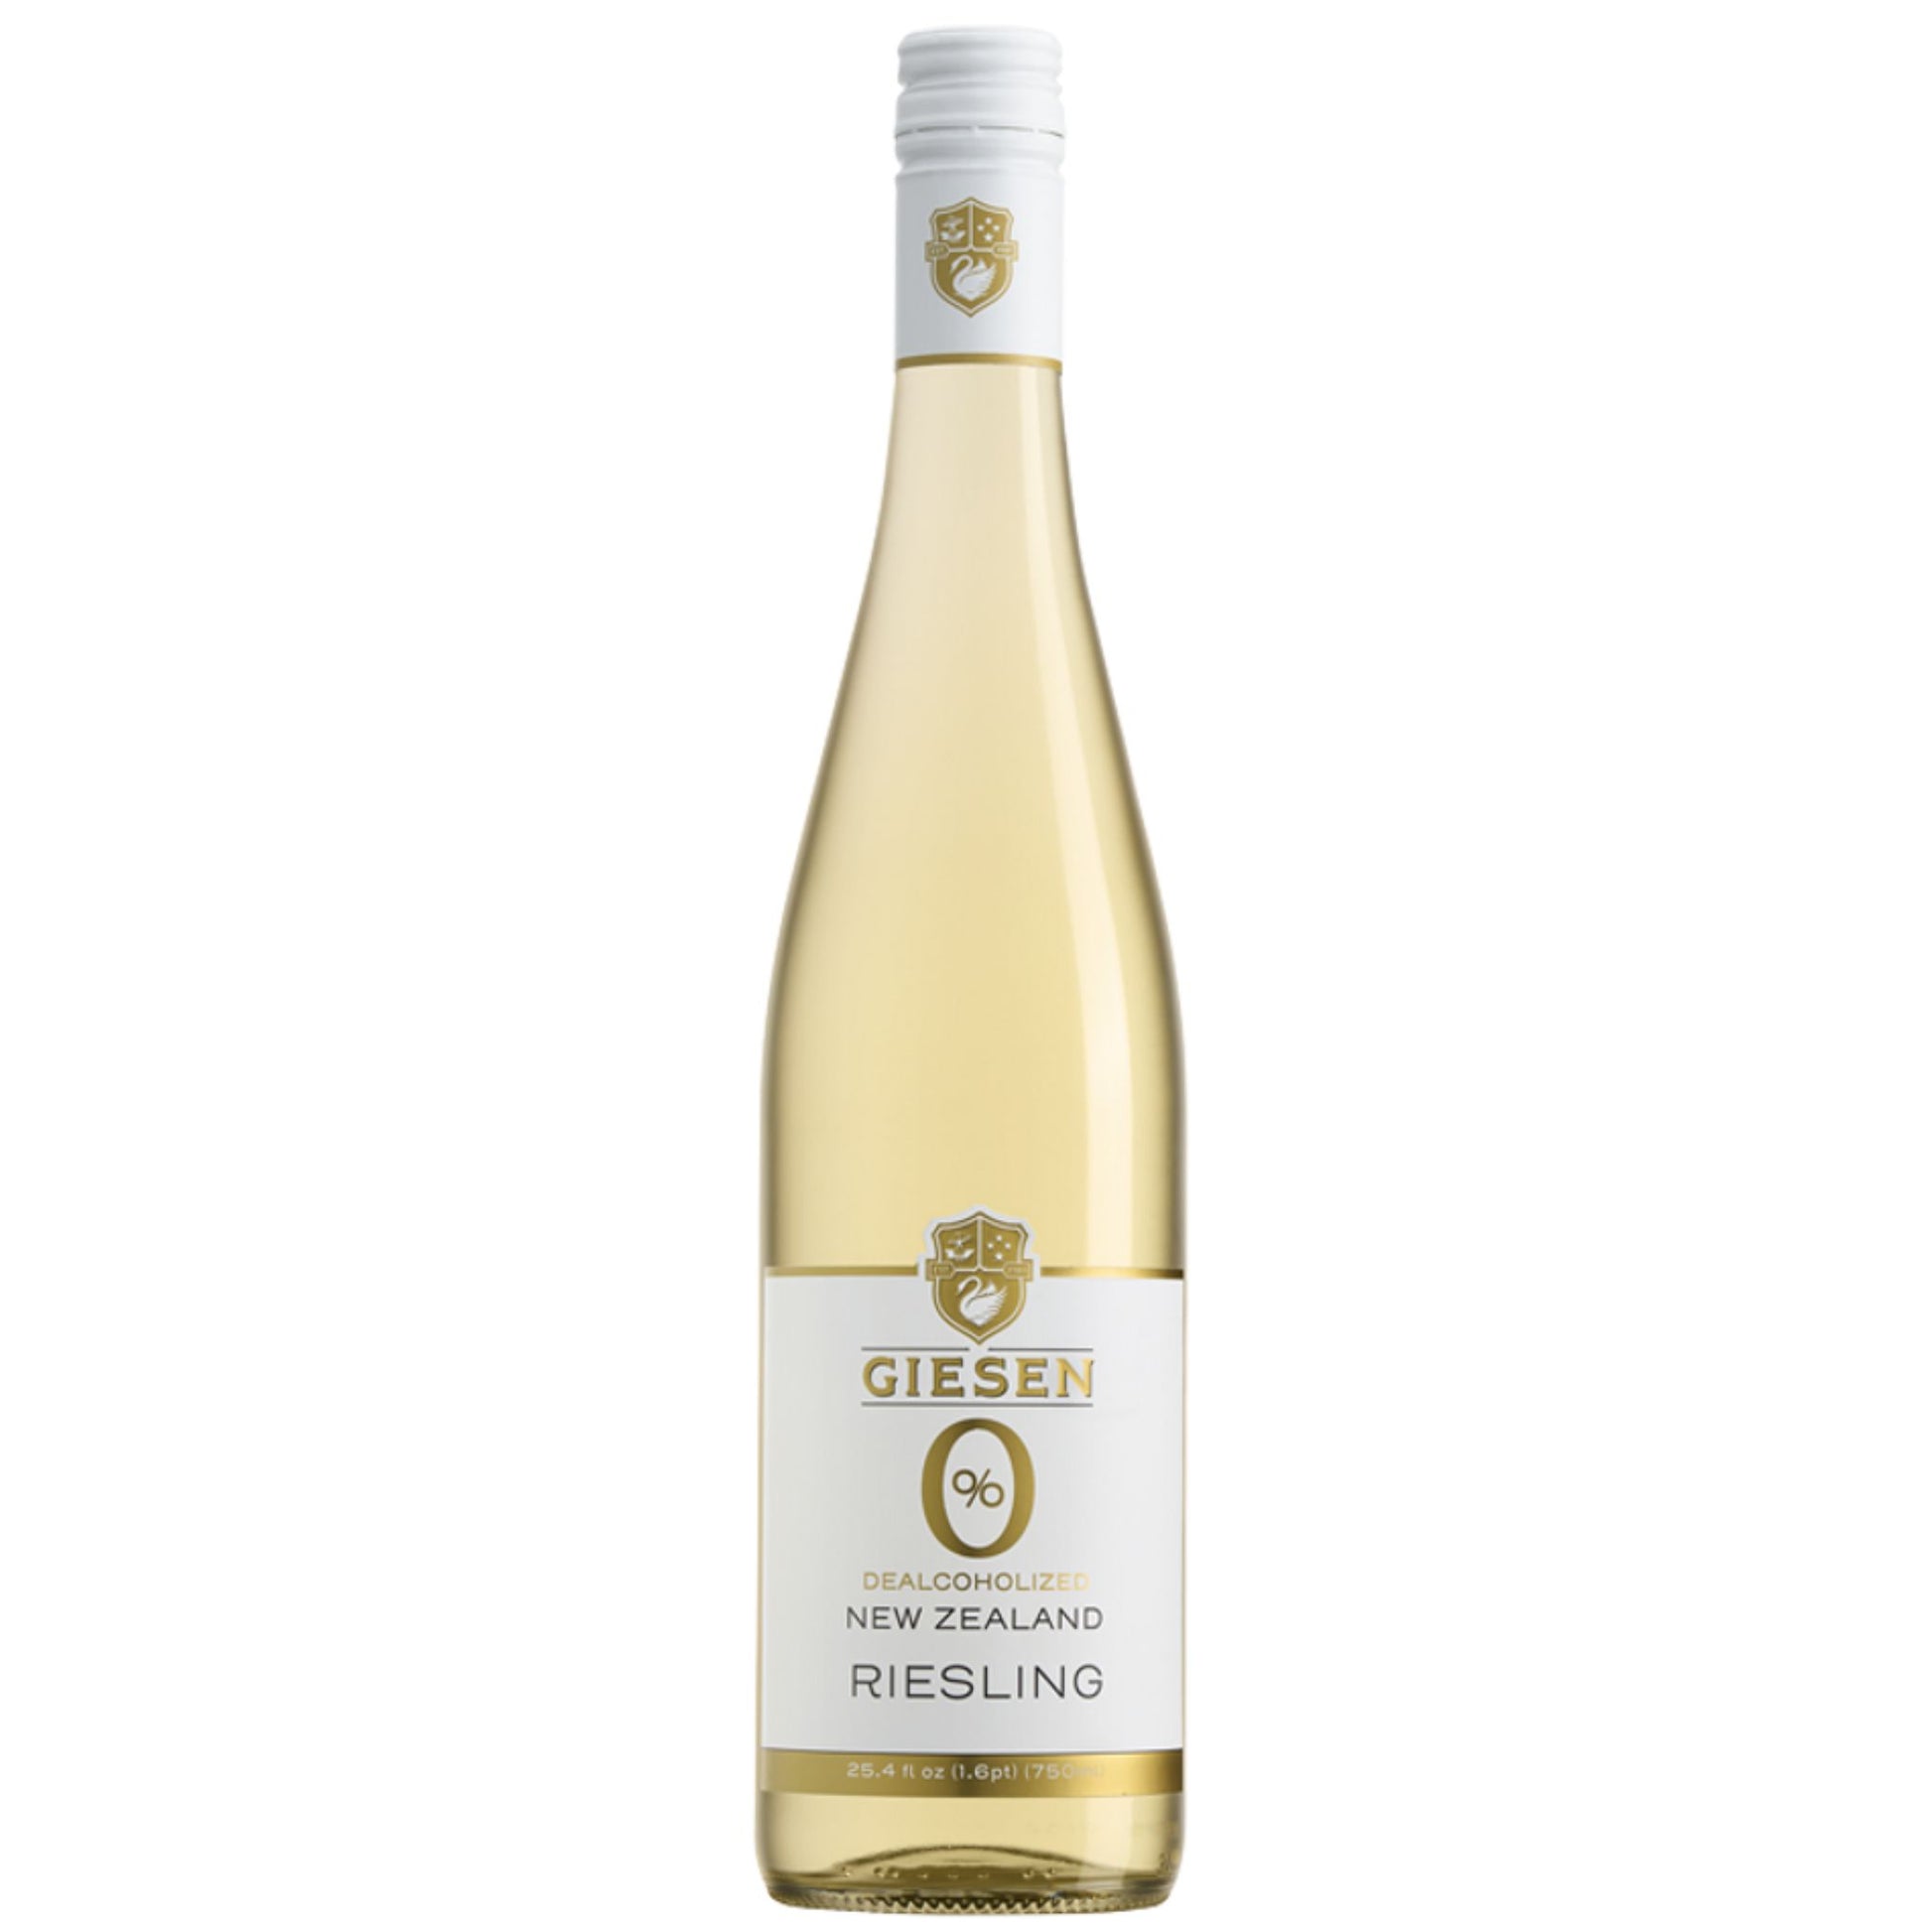 Giesen Alcohol-Free Riesling is available at Knyota Non-Alcoholic Drinks.